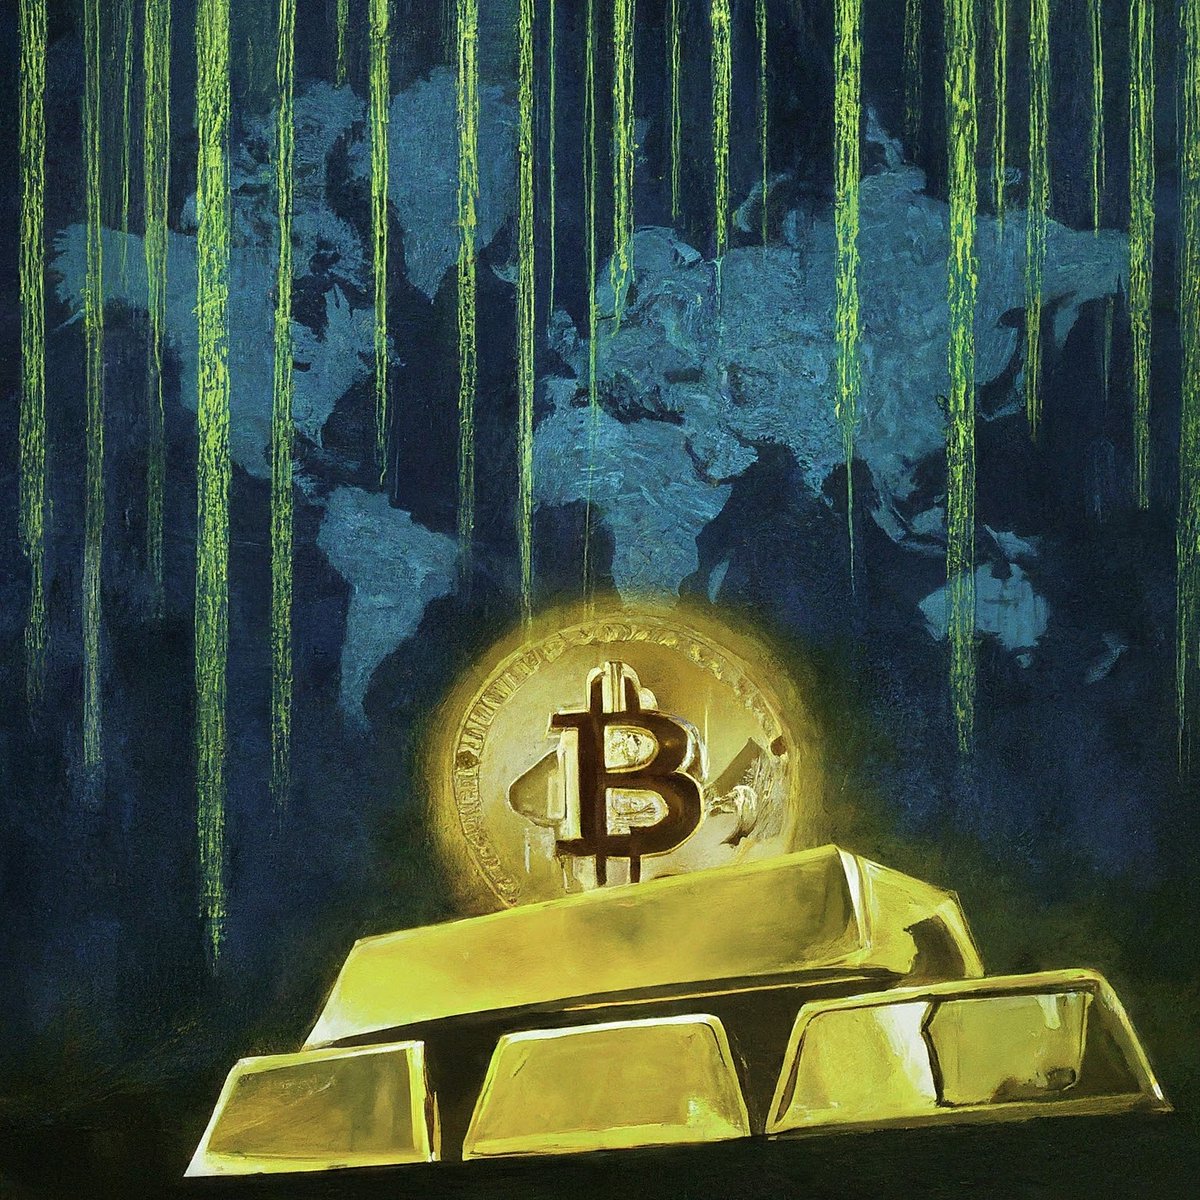 The future of finance is digital. Should every nation add Bitcoin to its national treasure chest? #BitcoinReserves